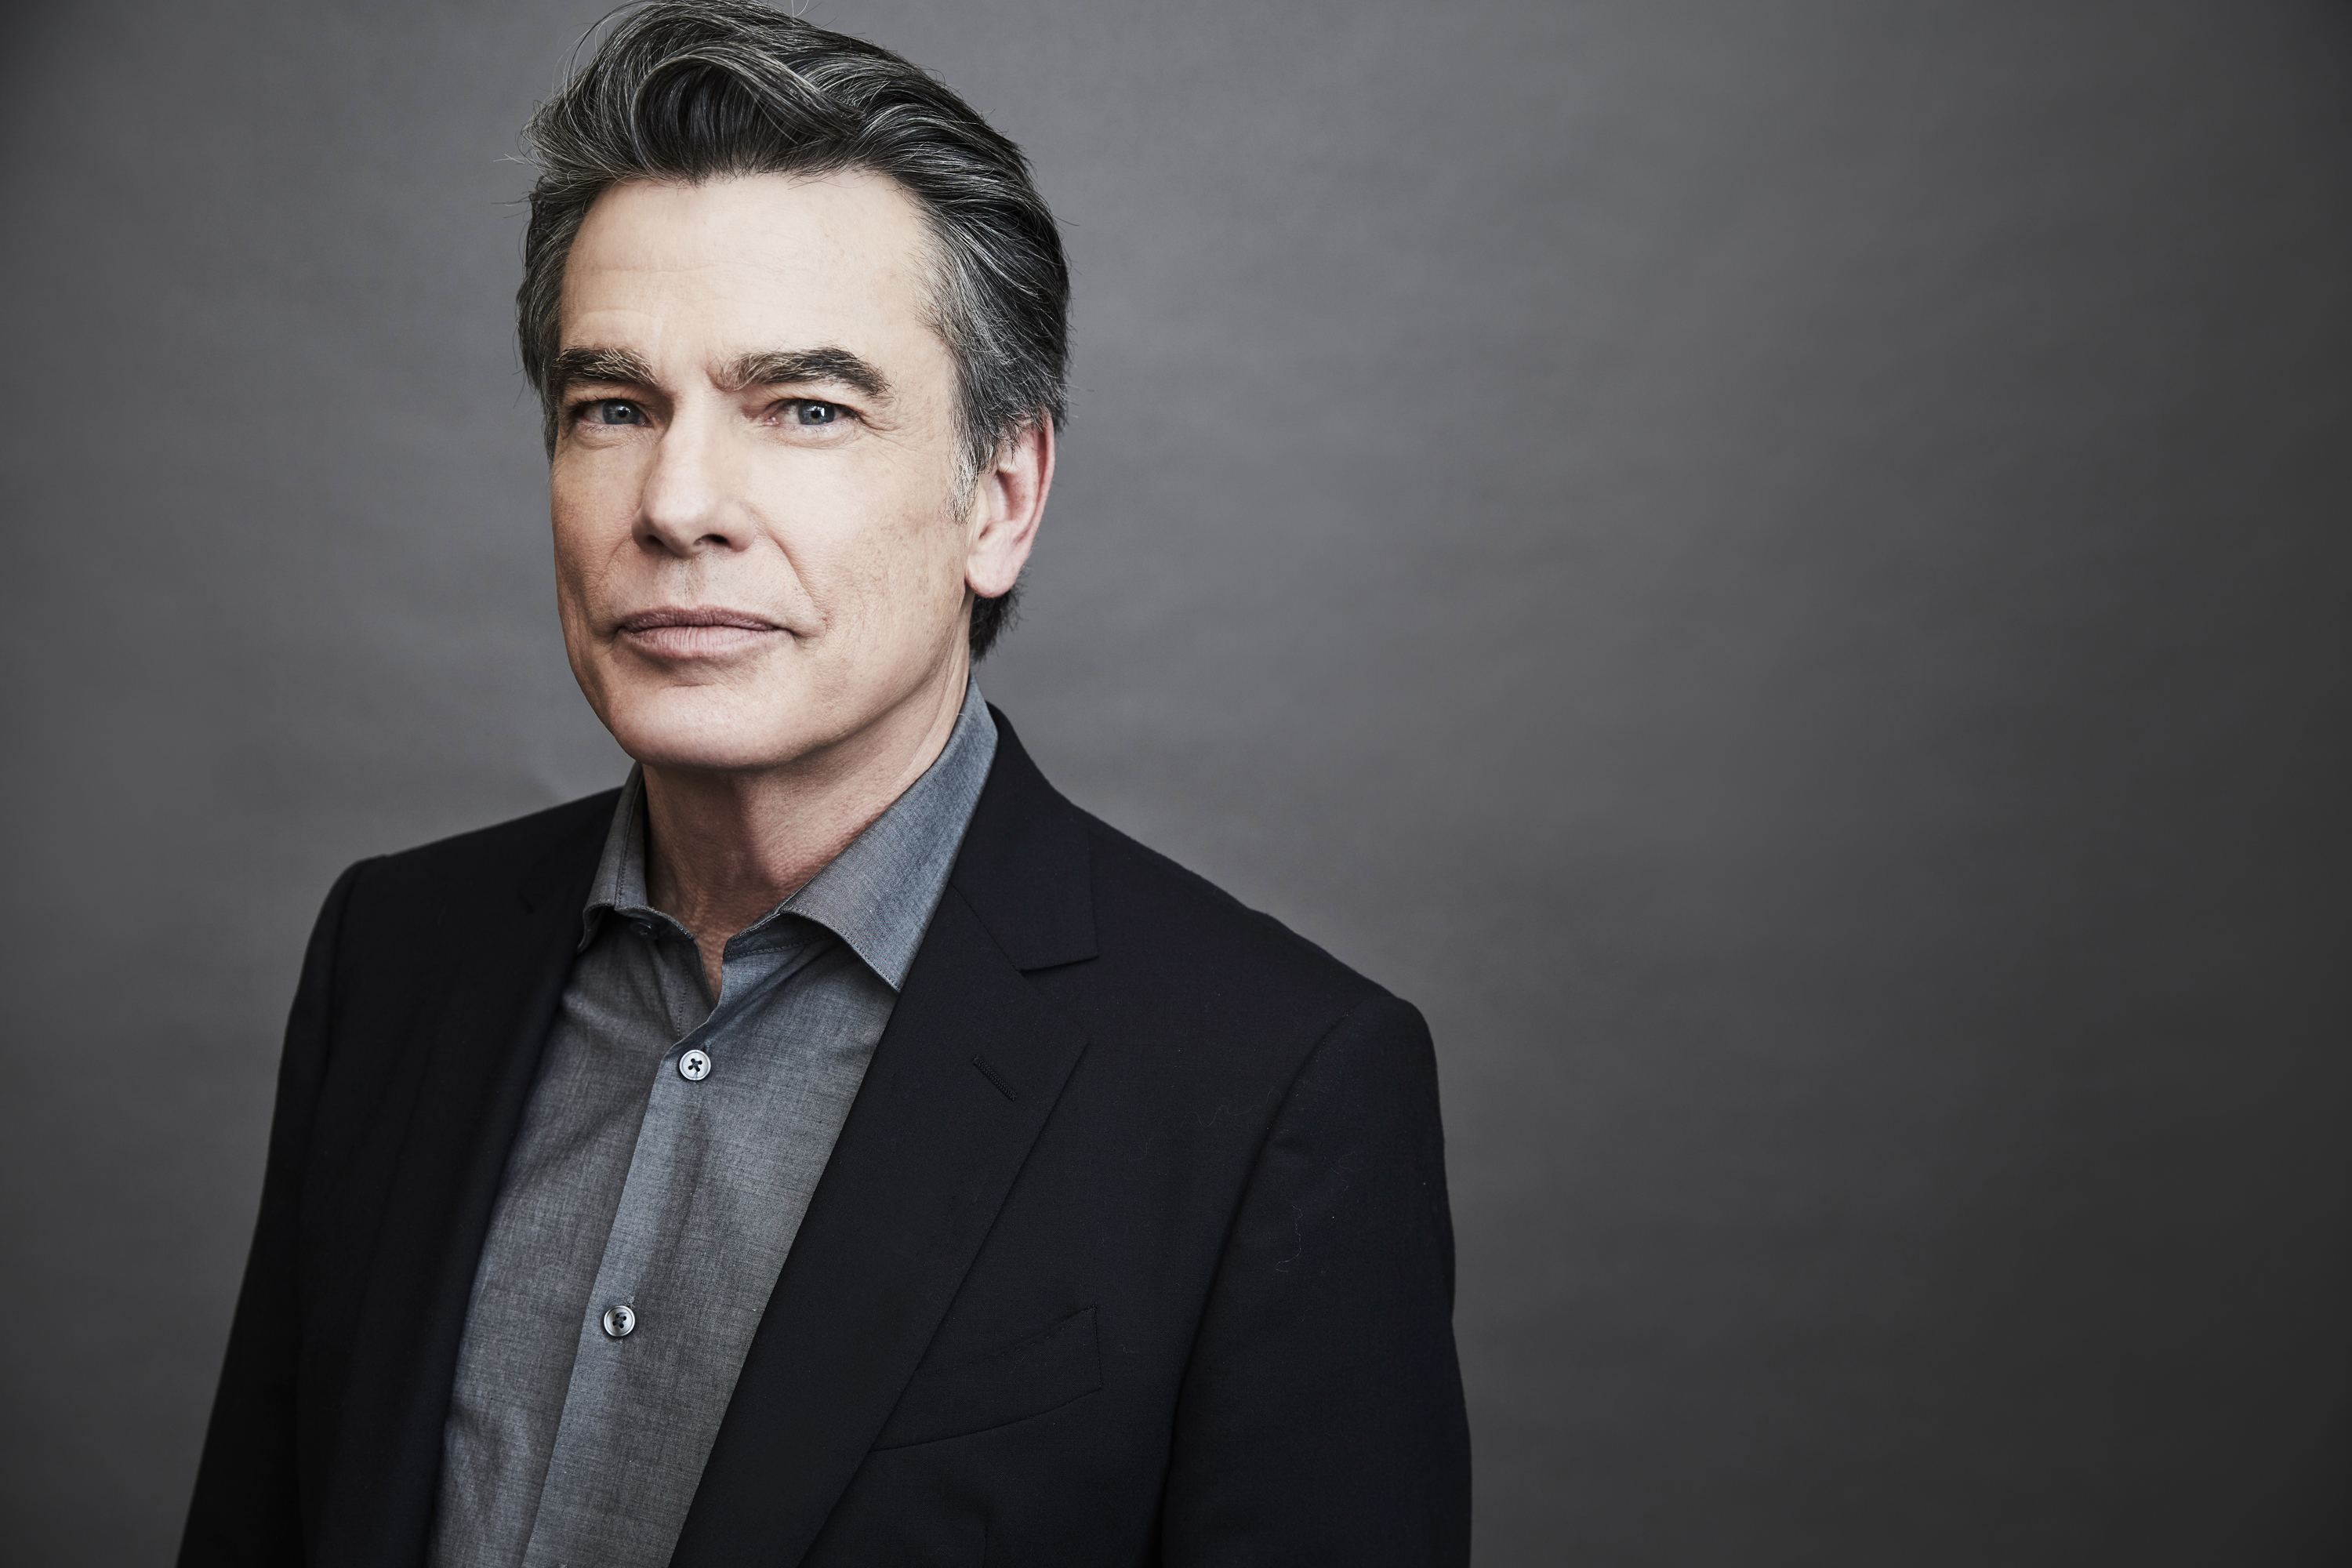 'Grey's Anatomy' newcomer Peter Gallagher in a black suit